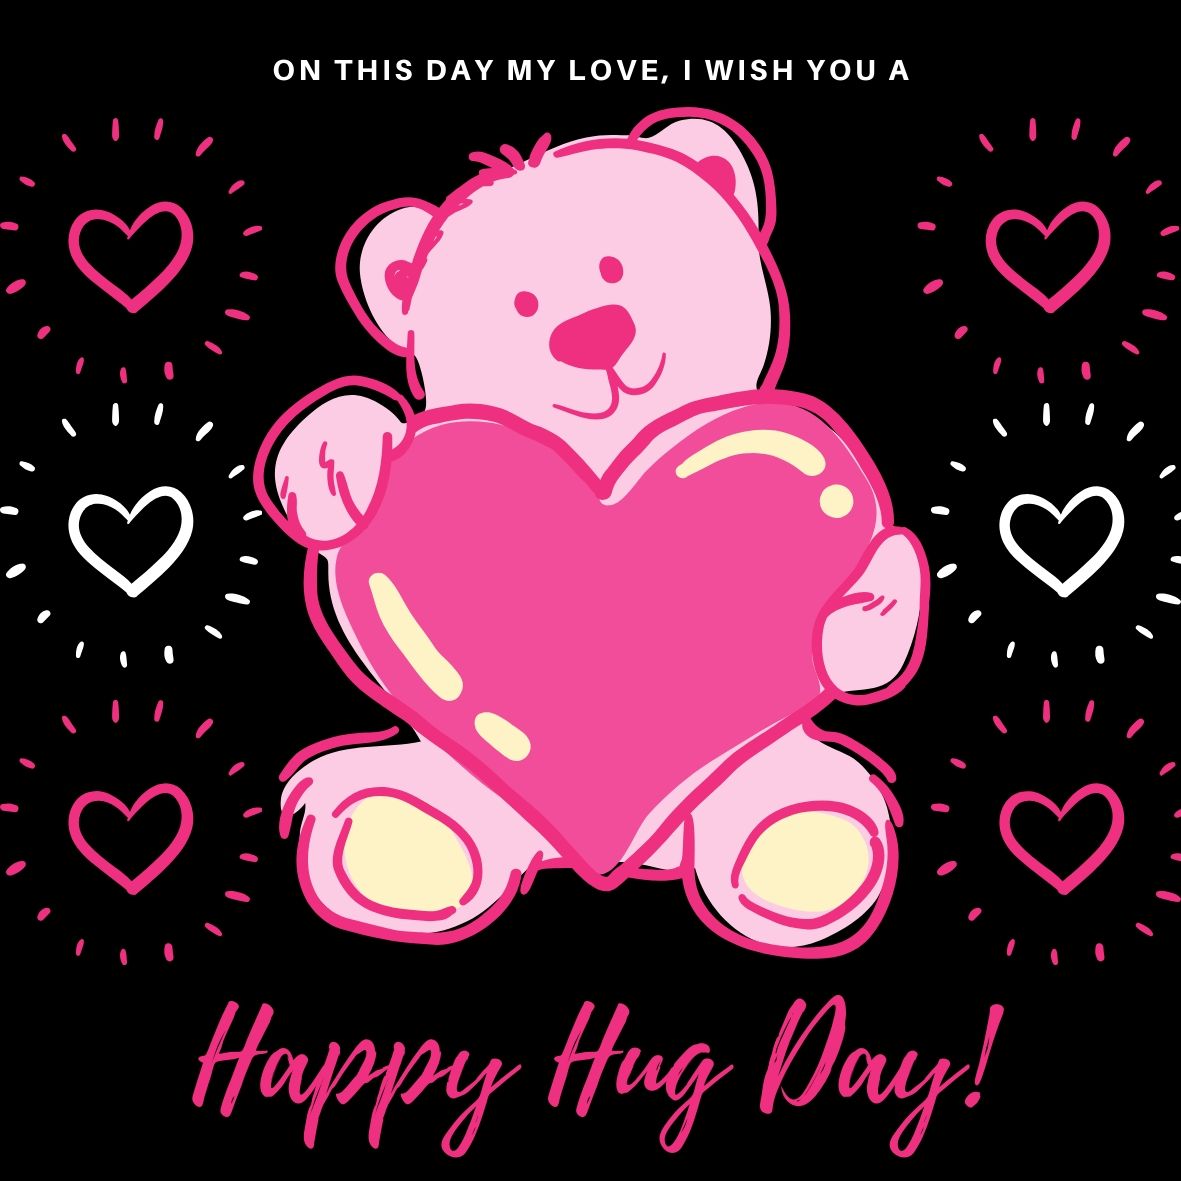 Happy Hug Day 2020 Image, Quotes & Best Wishes